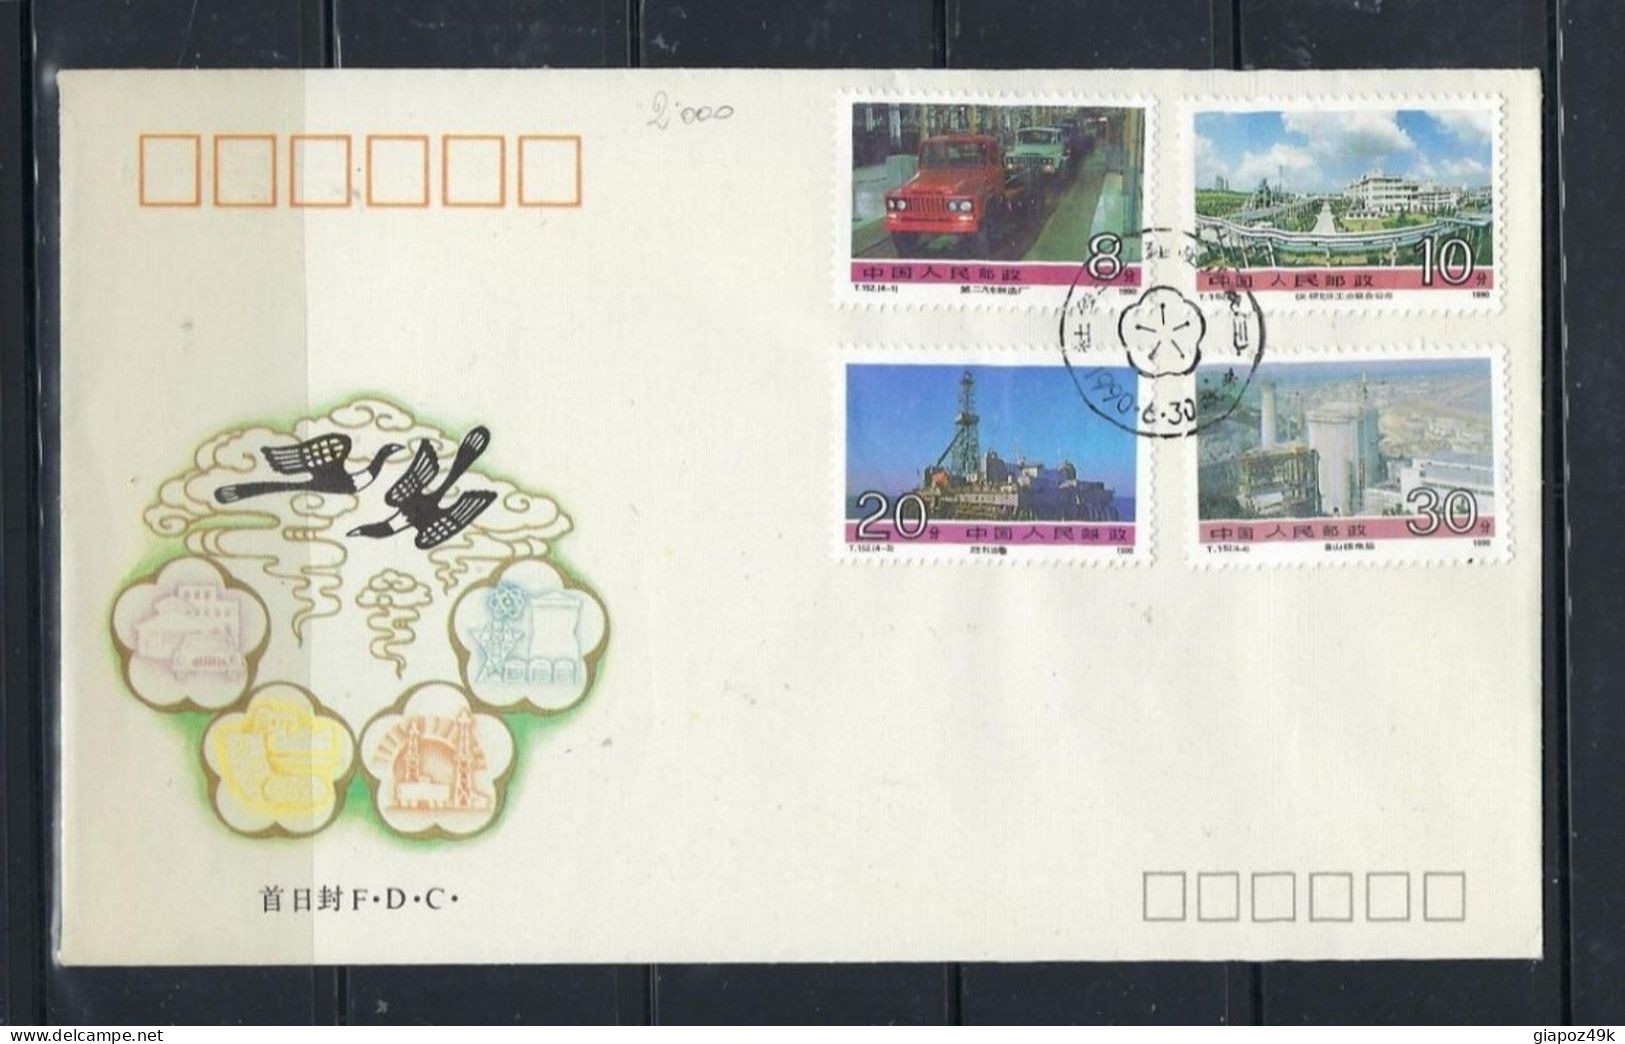 ● CHINA 1990 ֍ Industrie Cinesi ● Busta FDC ● Annullo Speciale ● Cat. ? € ● Lotto N. KK ● - 1980-1989